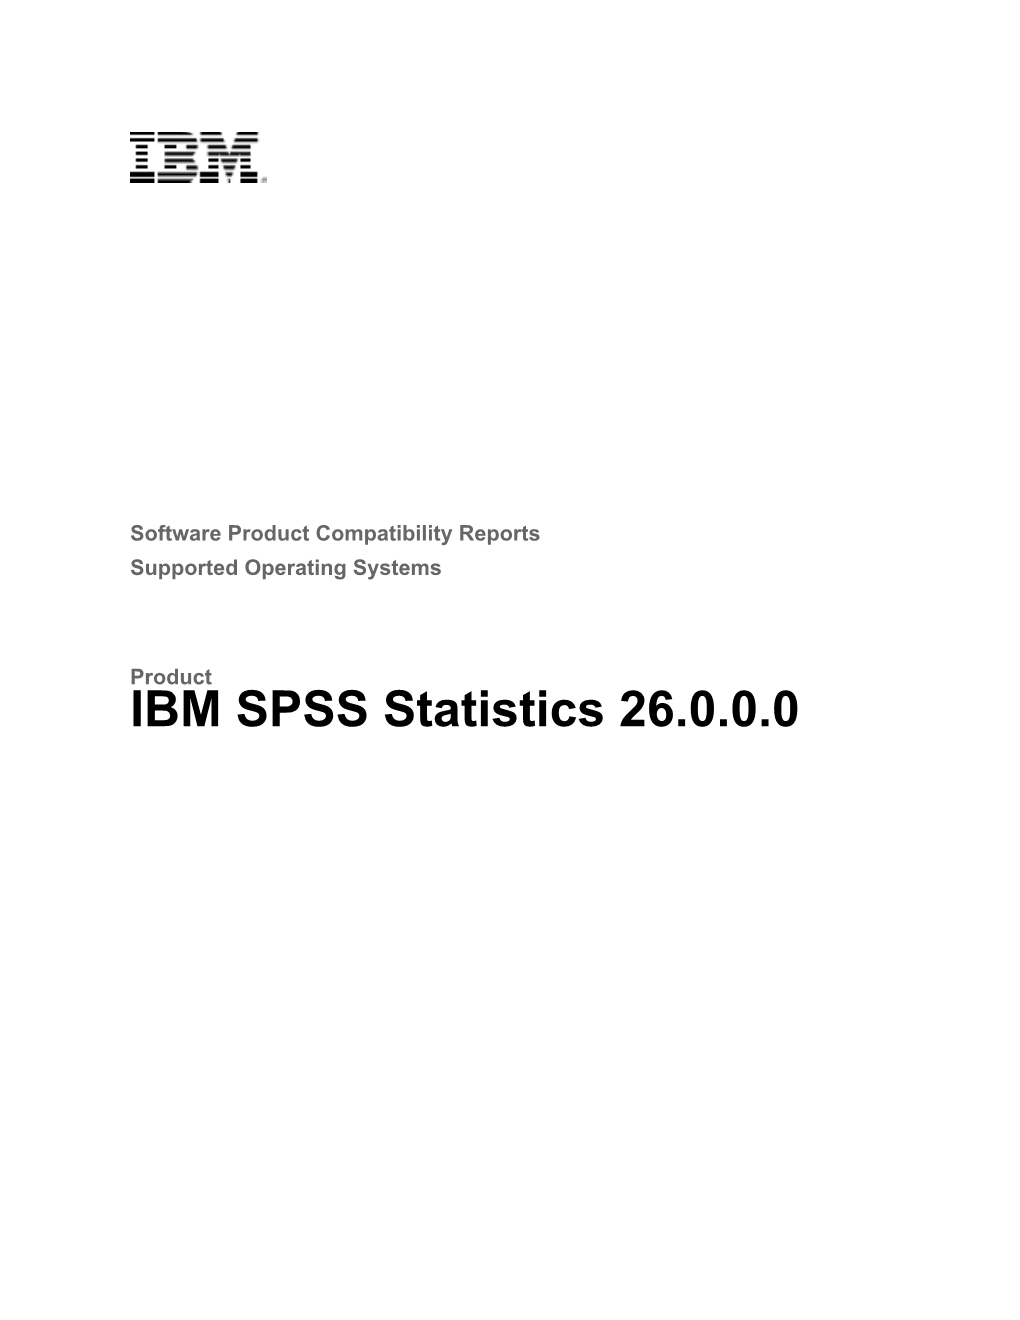 IBM SPSS Statistics 26.0.0.0 IBM SPSS Statistics 26.0.0.0 Supported Operating Systems